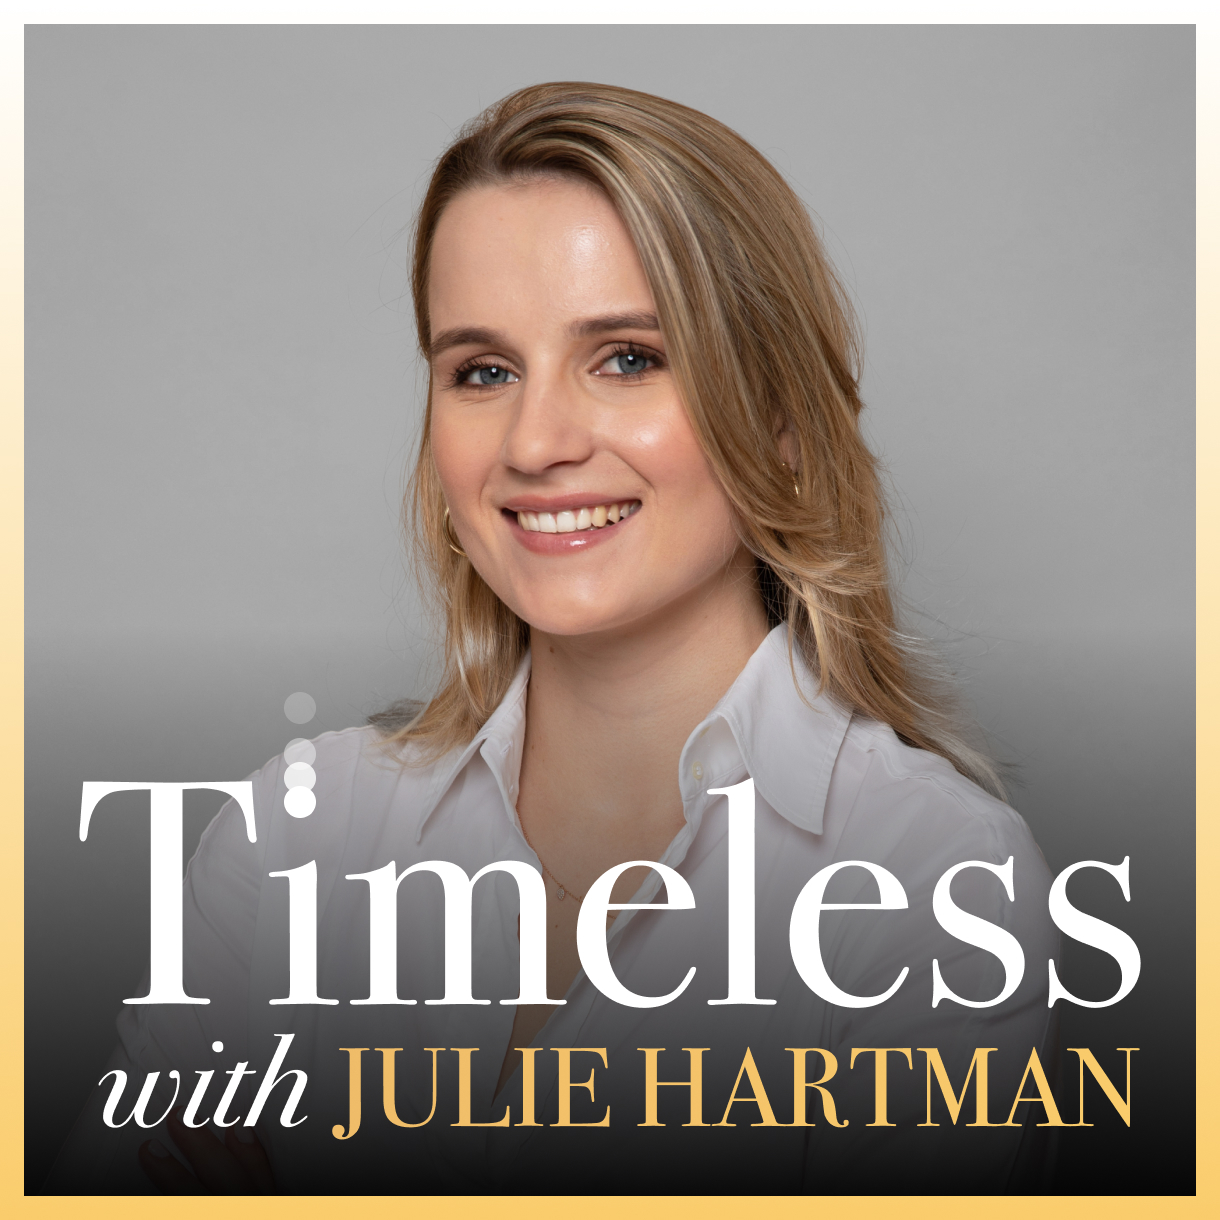 Julie in NYC, Columbia University, Pro Hamas Protests, What She Saw Was Very Disturbing